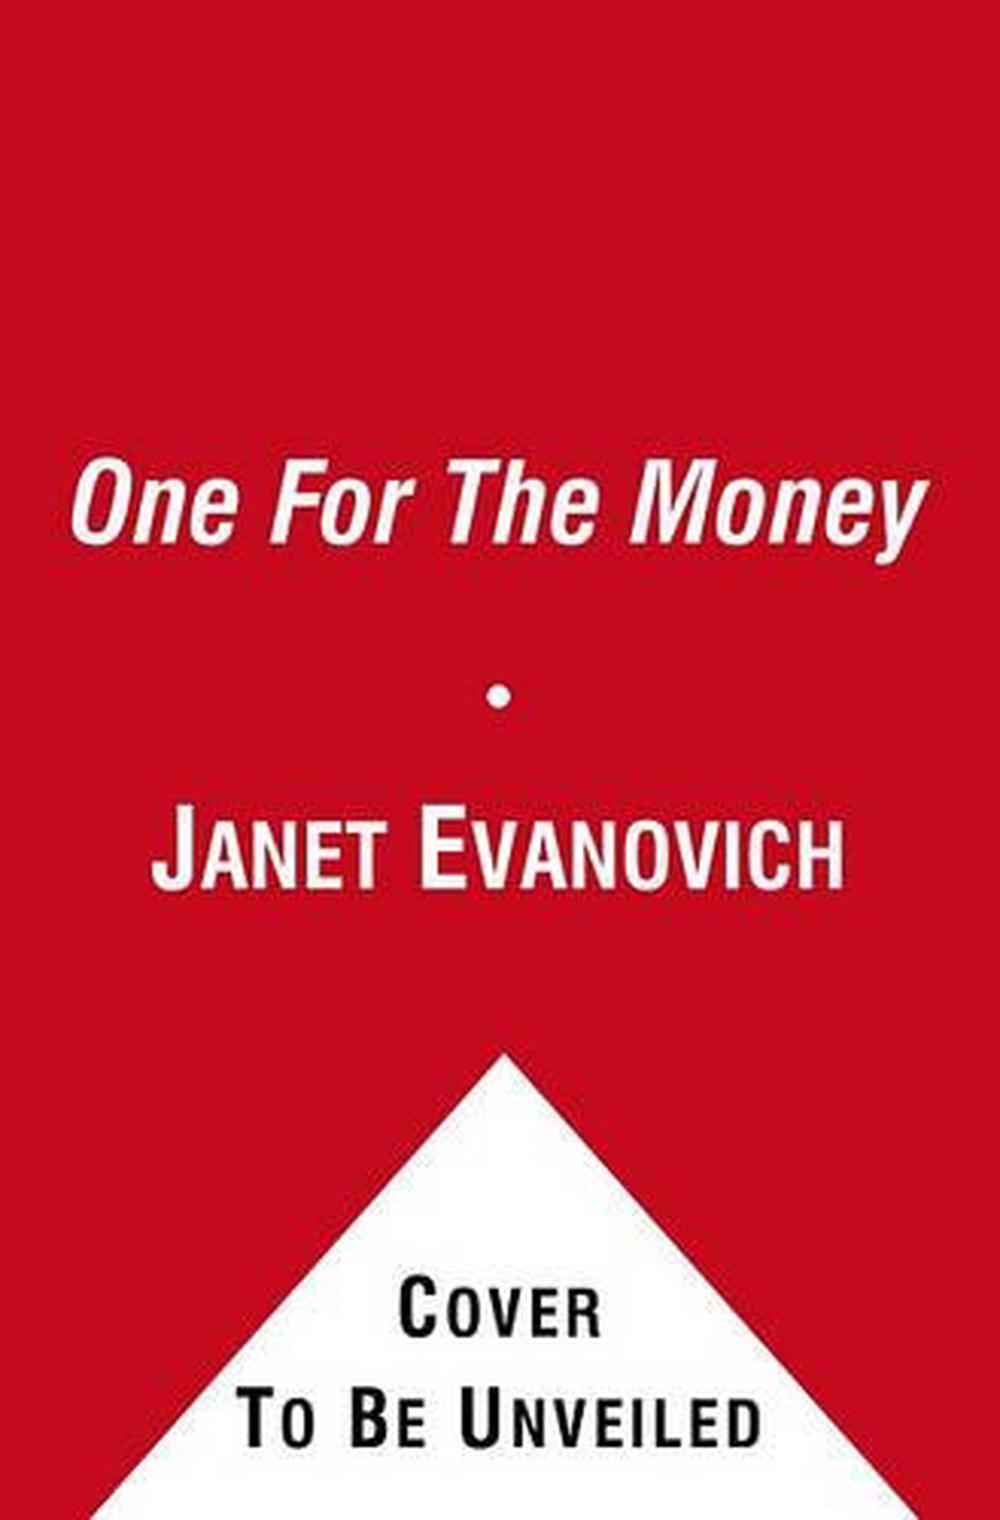 one for the money by janet evanovich